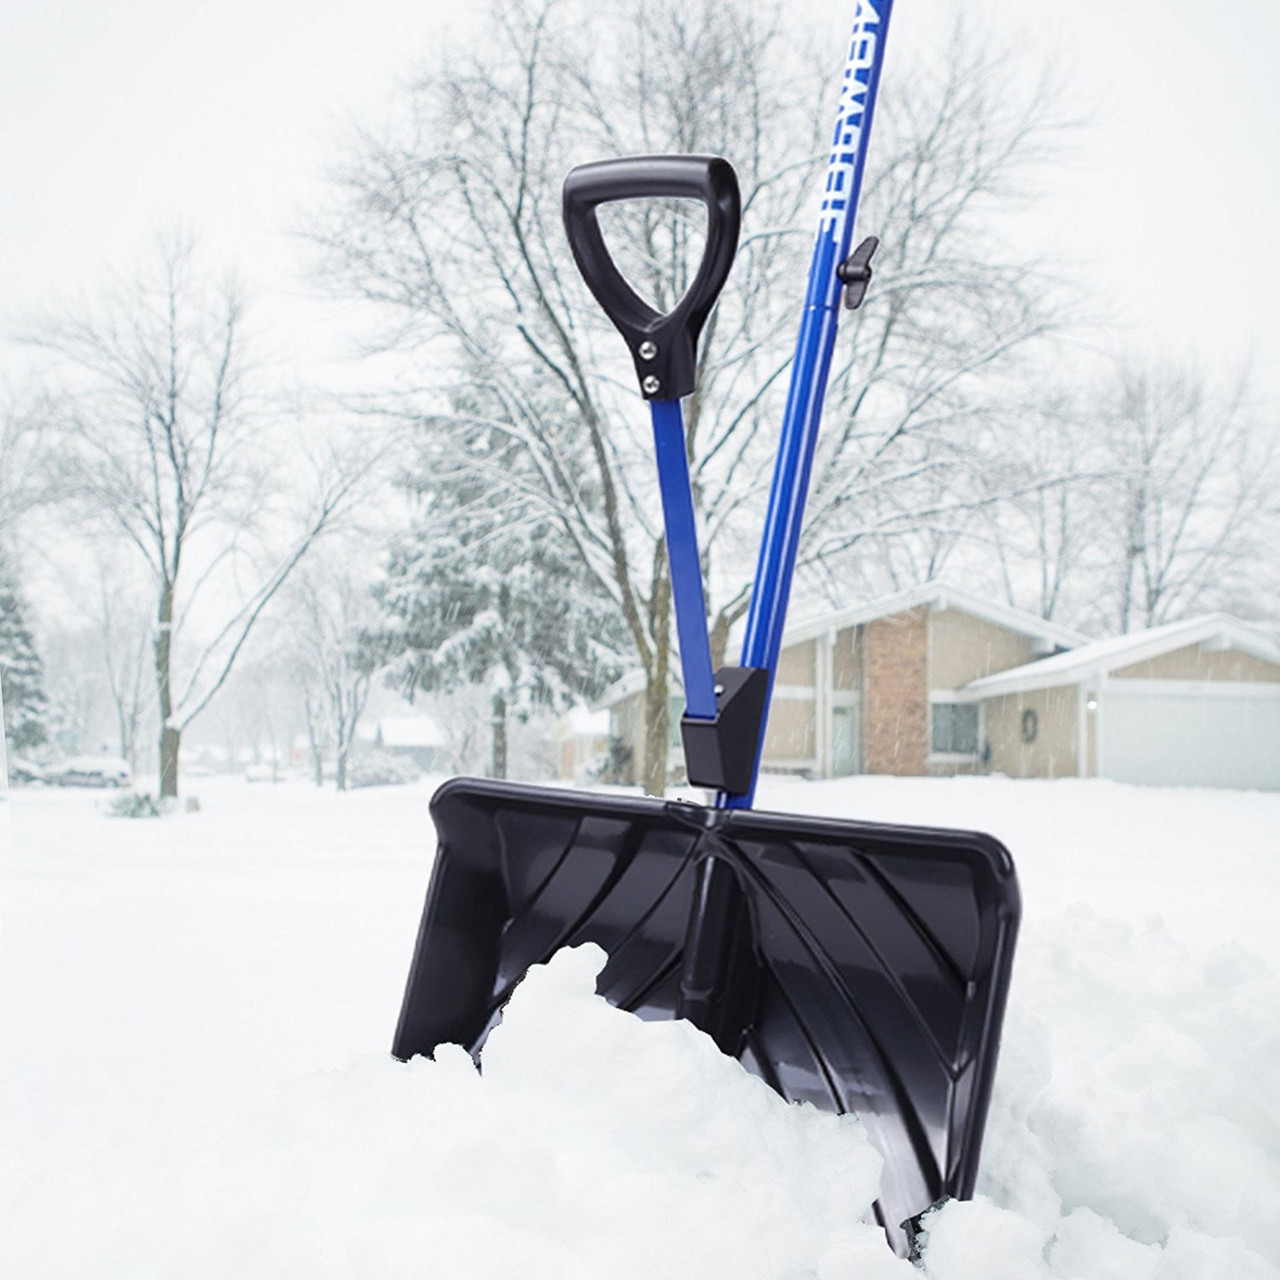 Snow Joe Shovelution Strain-Reducing Snow Shovel with Spring-Assist product image